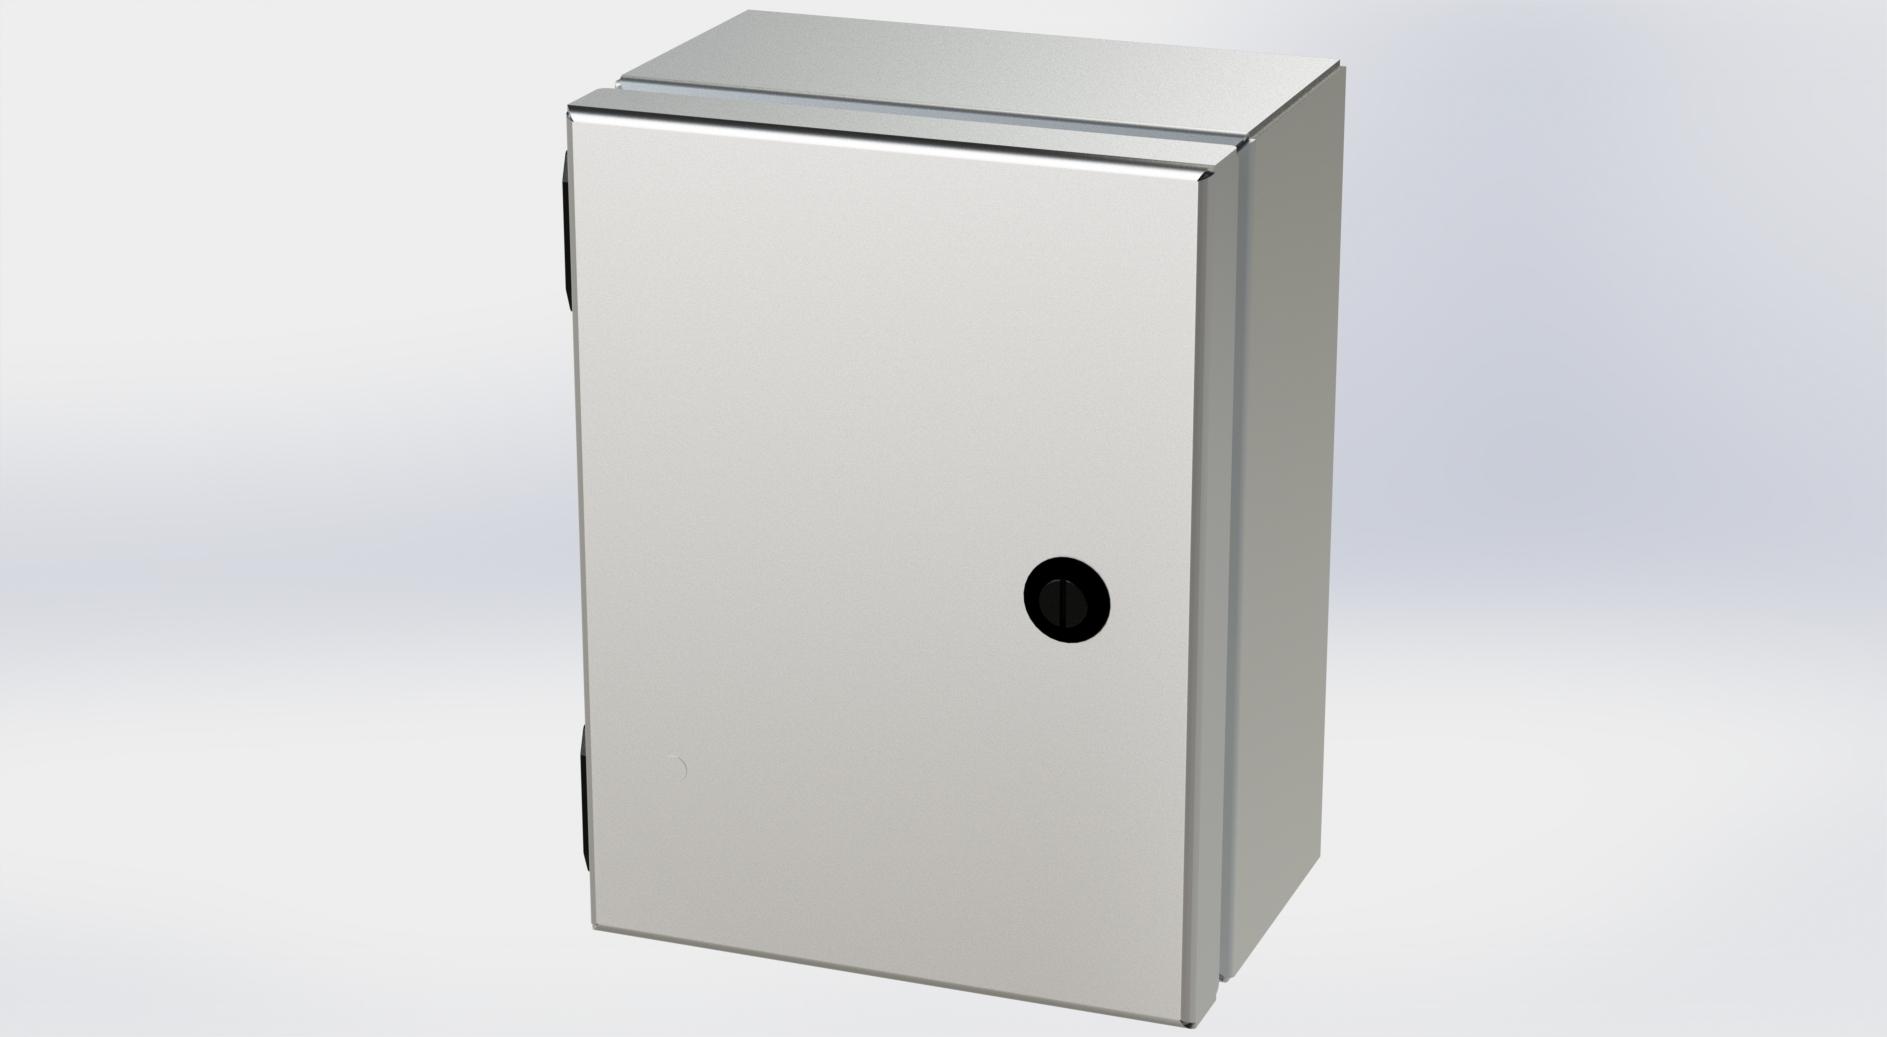 Saginaw Control SCE-806ELJSS S.S. ELJ Enclosure, Height:8.00", Width:6.00", Depth:4.00", #4 brushed finish on all exterior surfaces. Optional sub-panels are powder coated white.